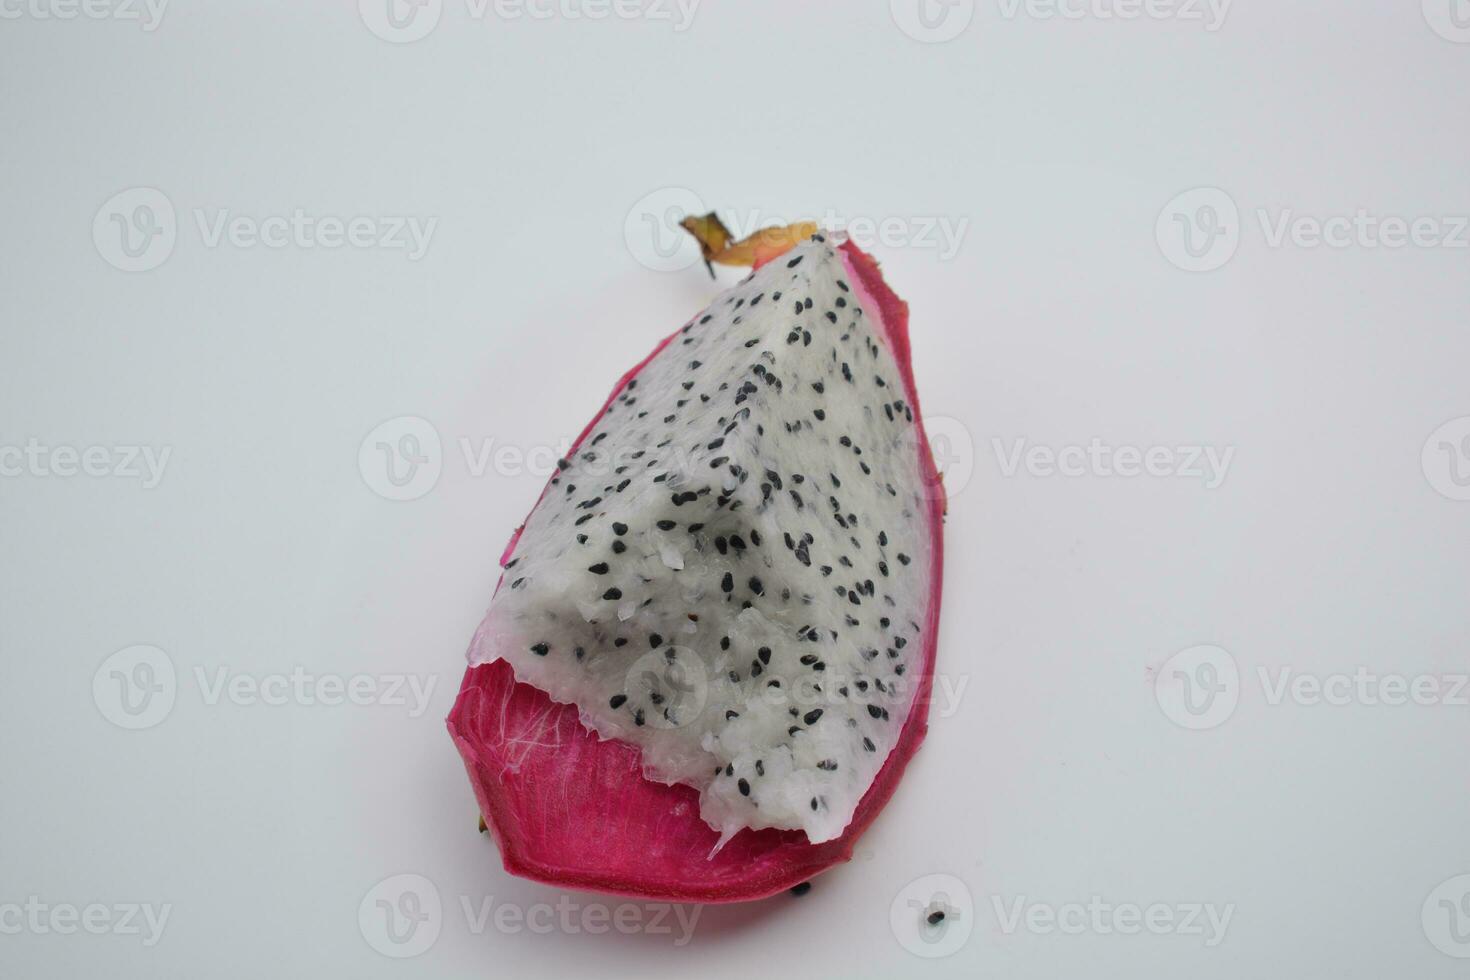 Dragon fruit, a fruit with many seeds, on a white background photo